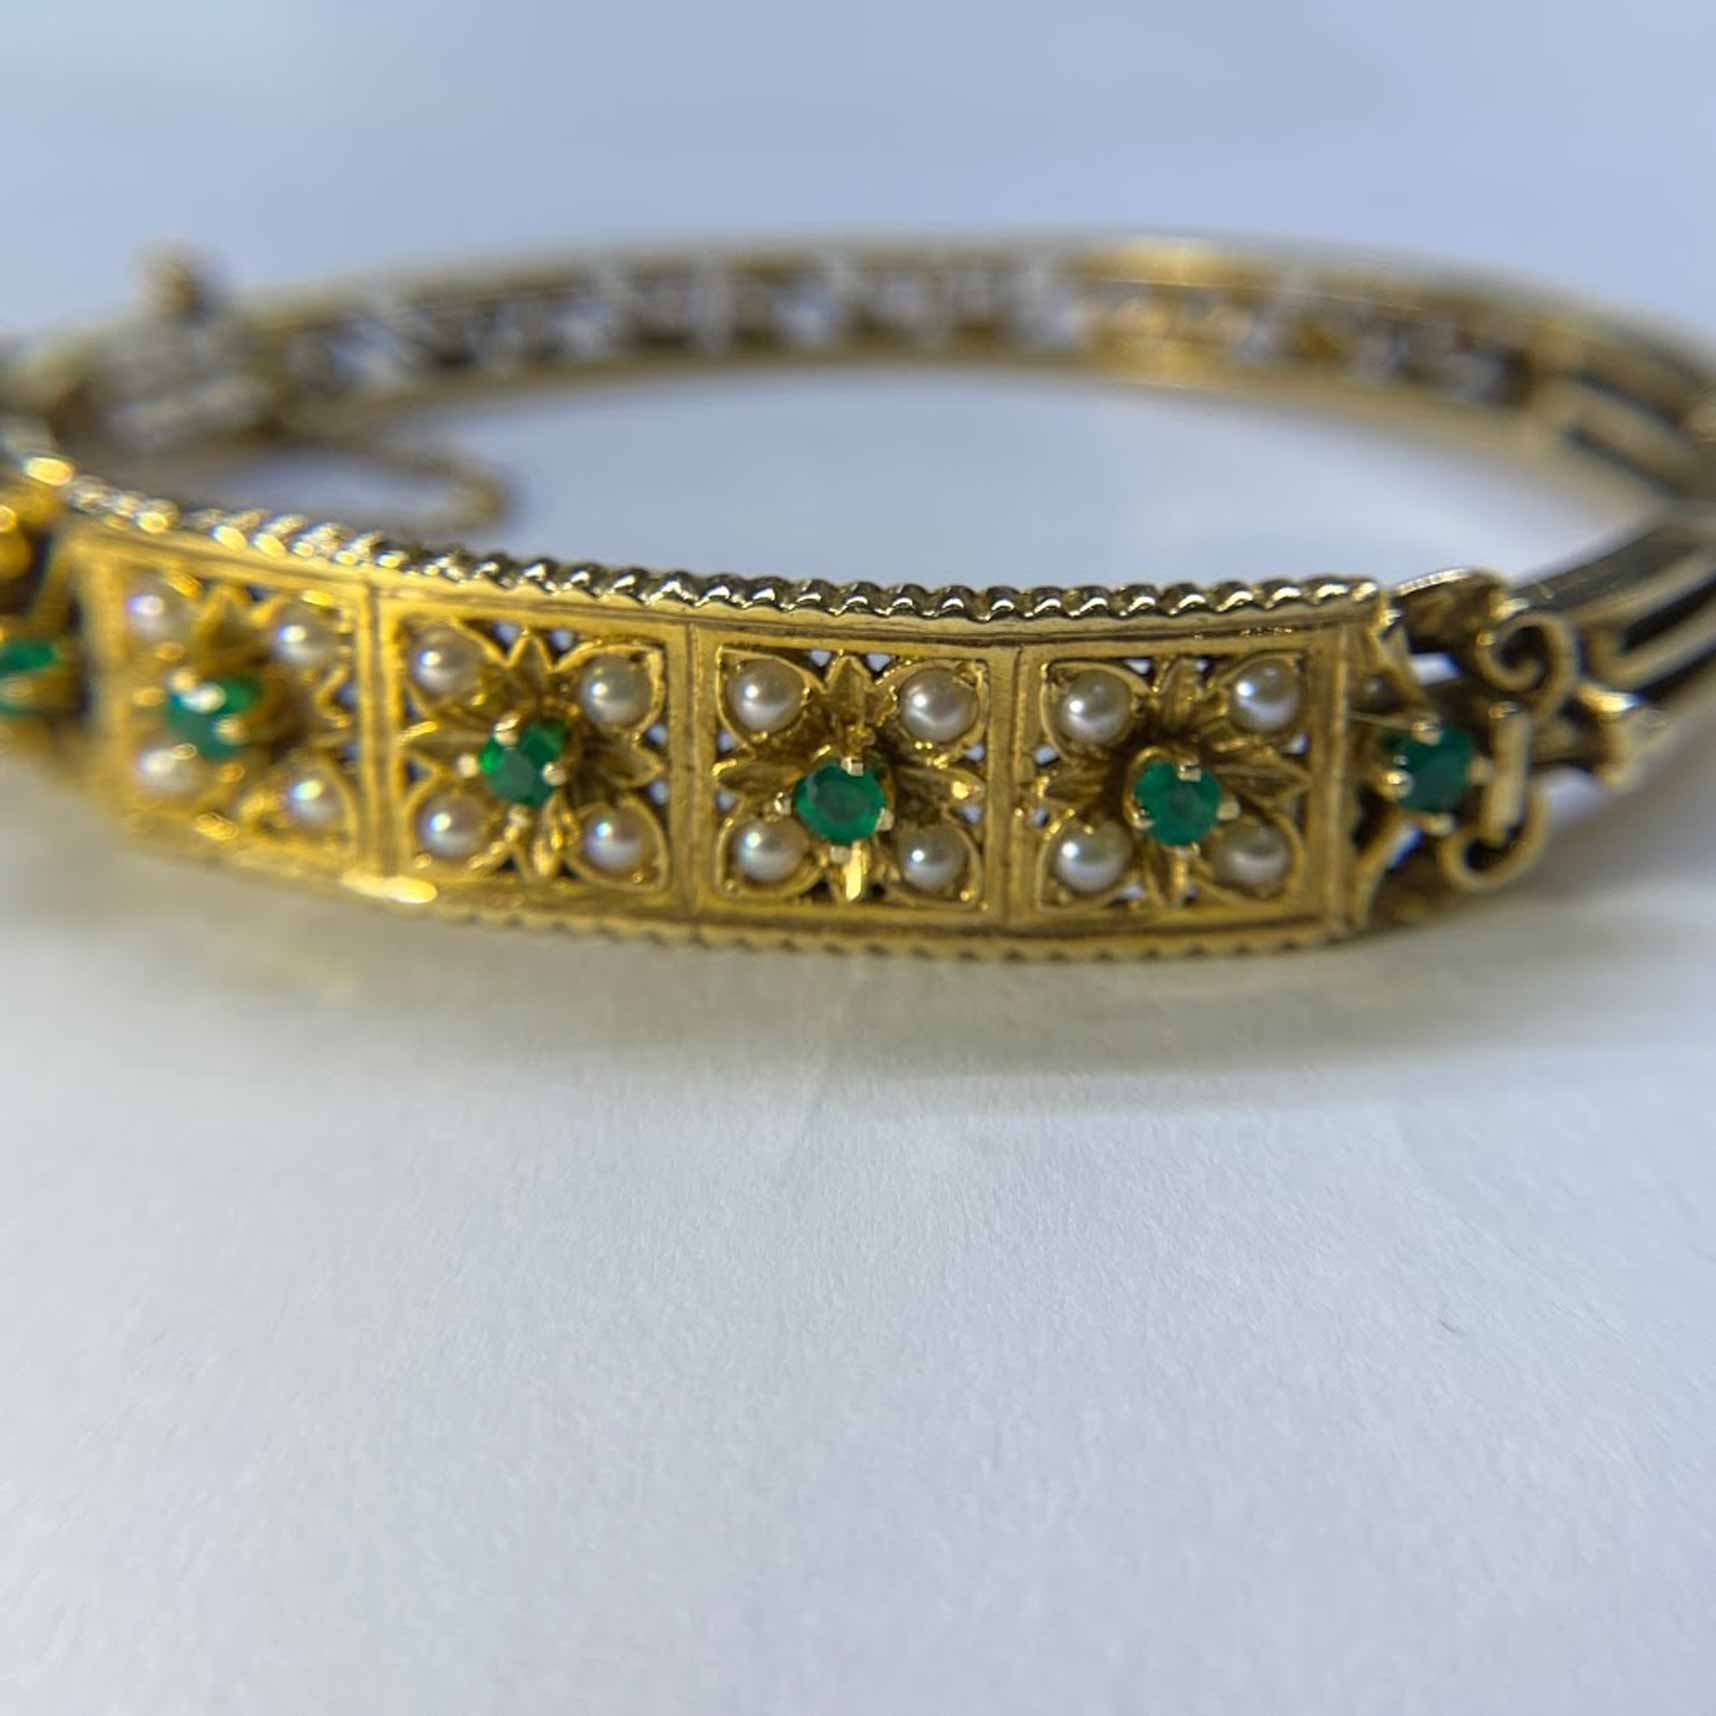 Antique Emerald and Pearl Bracelet (Estate) Robert and